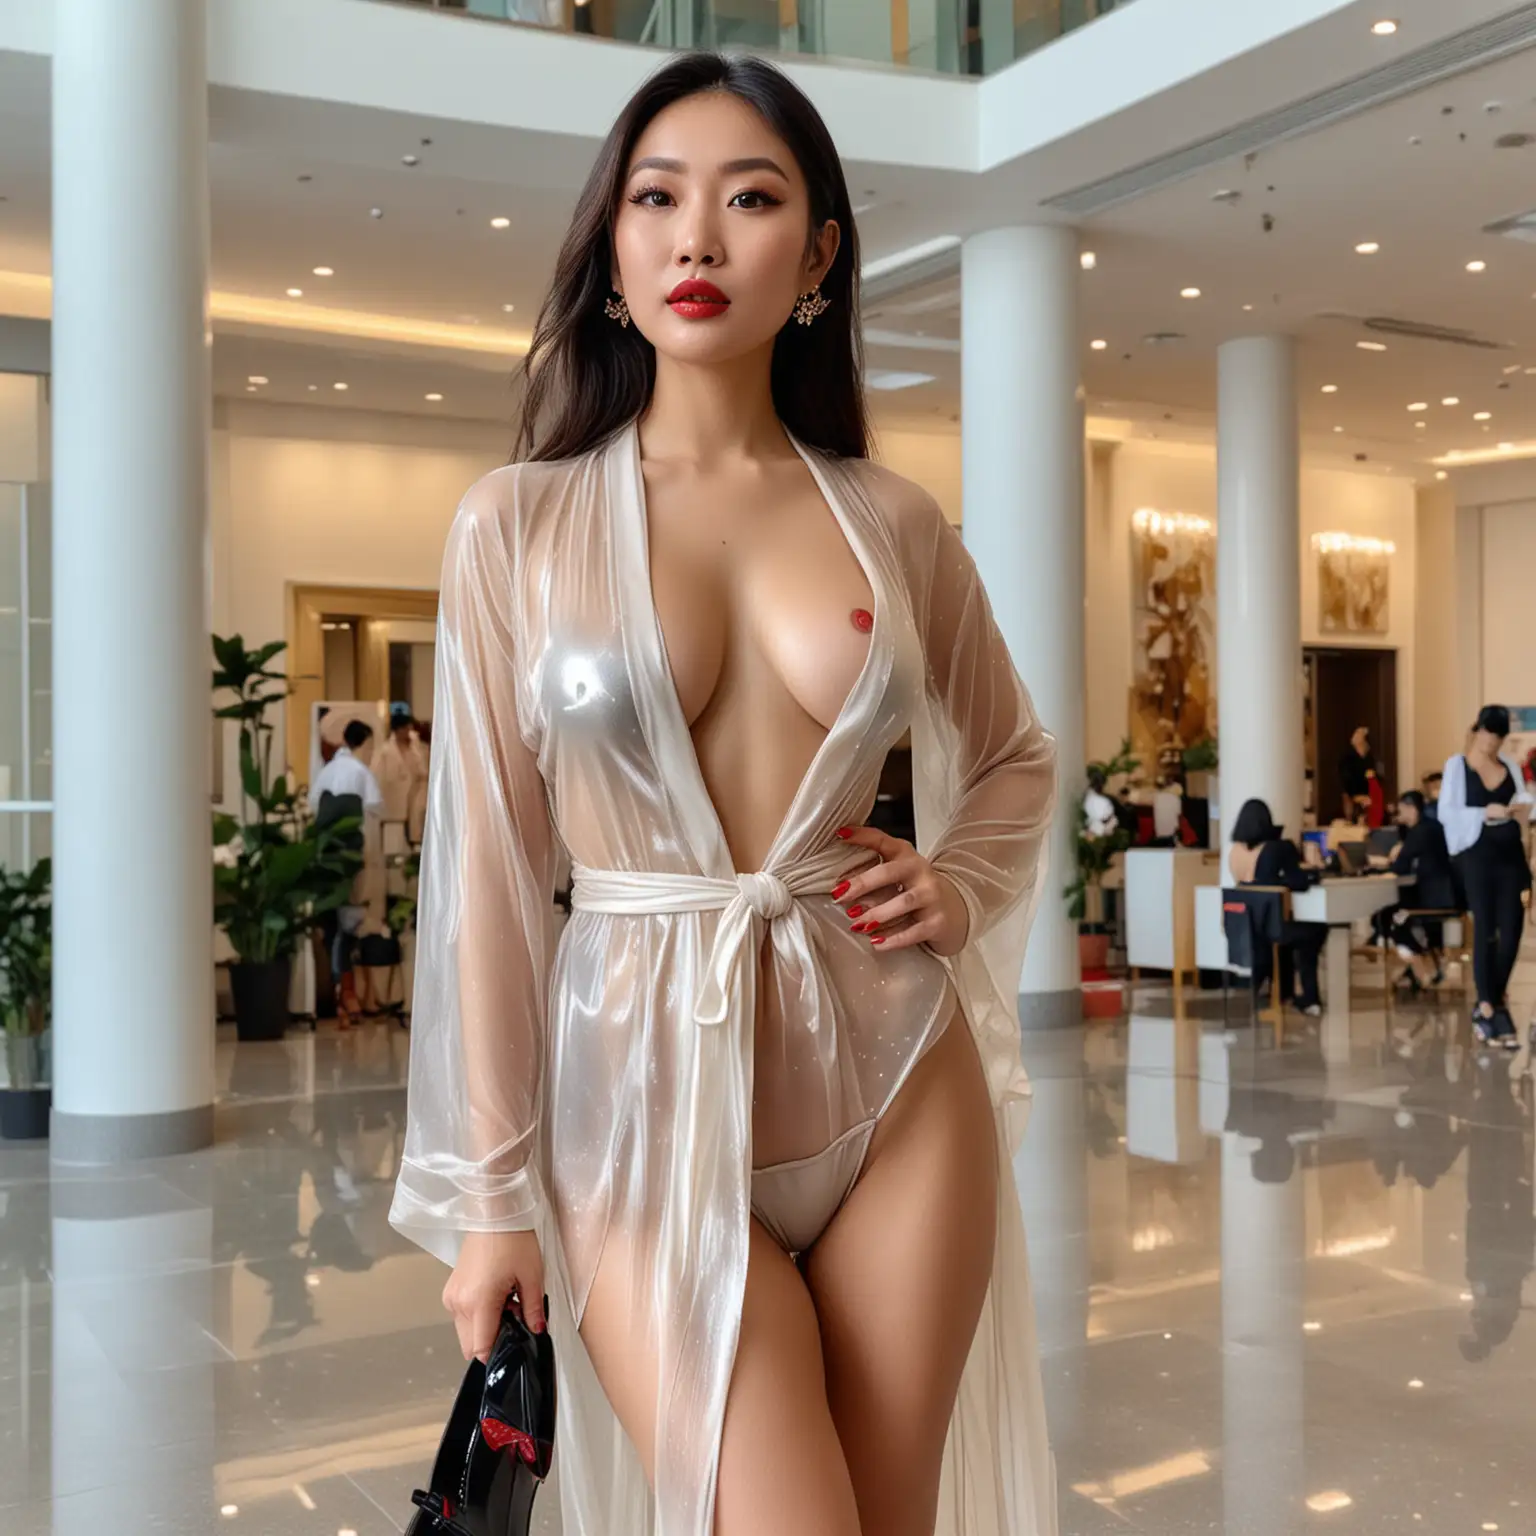 Hot, beautiful Singaporean Chinese influencer wearing a metallic bikini and a sheer silk chiffon robe, red glossy lipstick, lots of makeup and Louboutin patent leather heels in a crowded office lobby. Passers by ogle at her